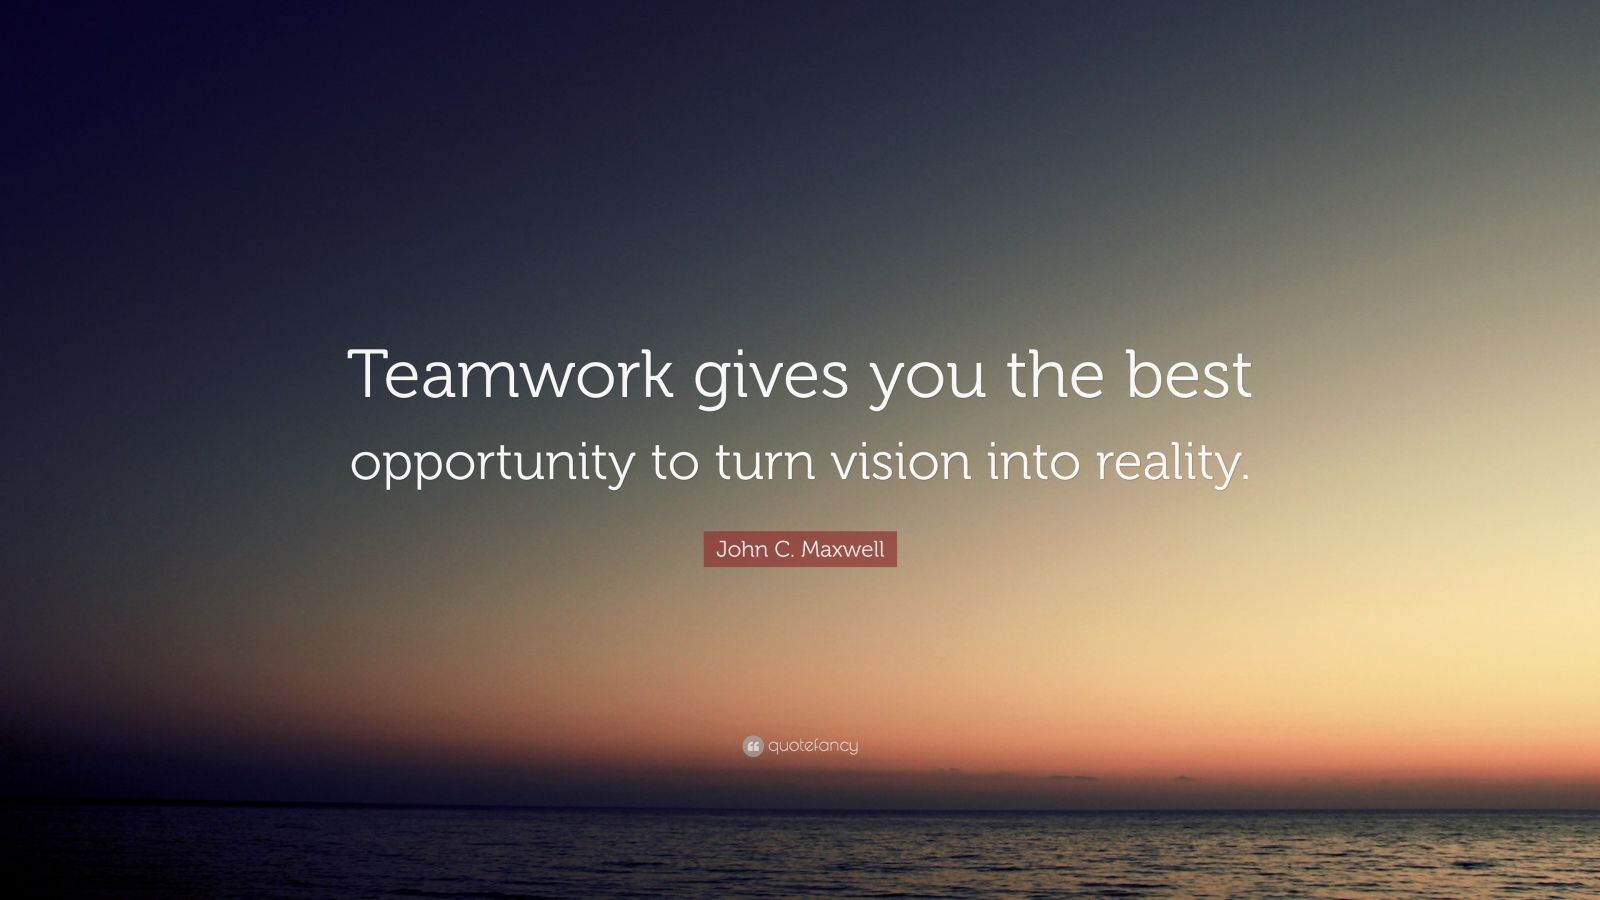 John C. Maxwell Quote: “Teamwork gives you the best opportunity to turn